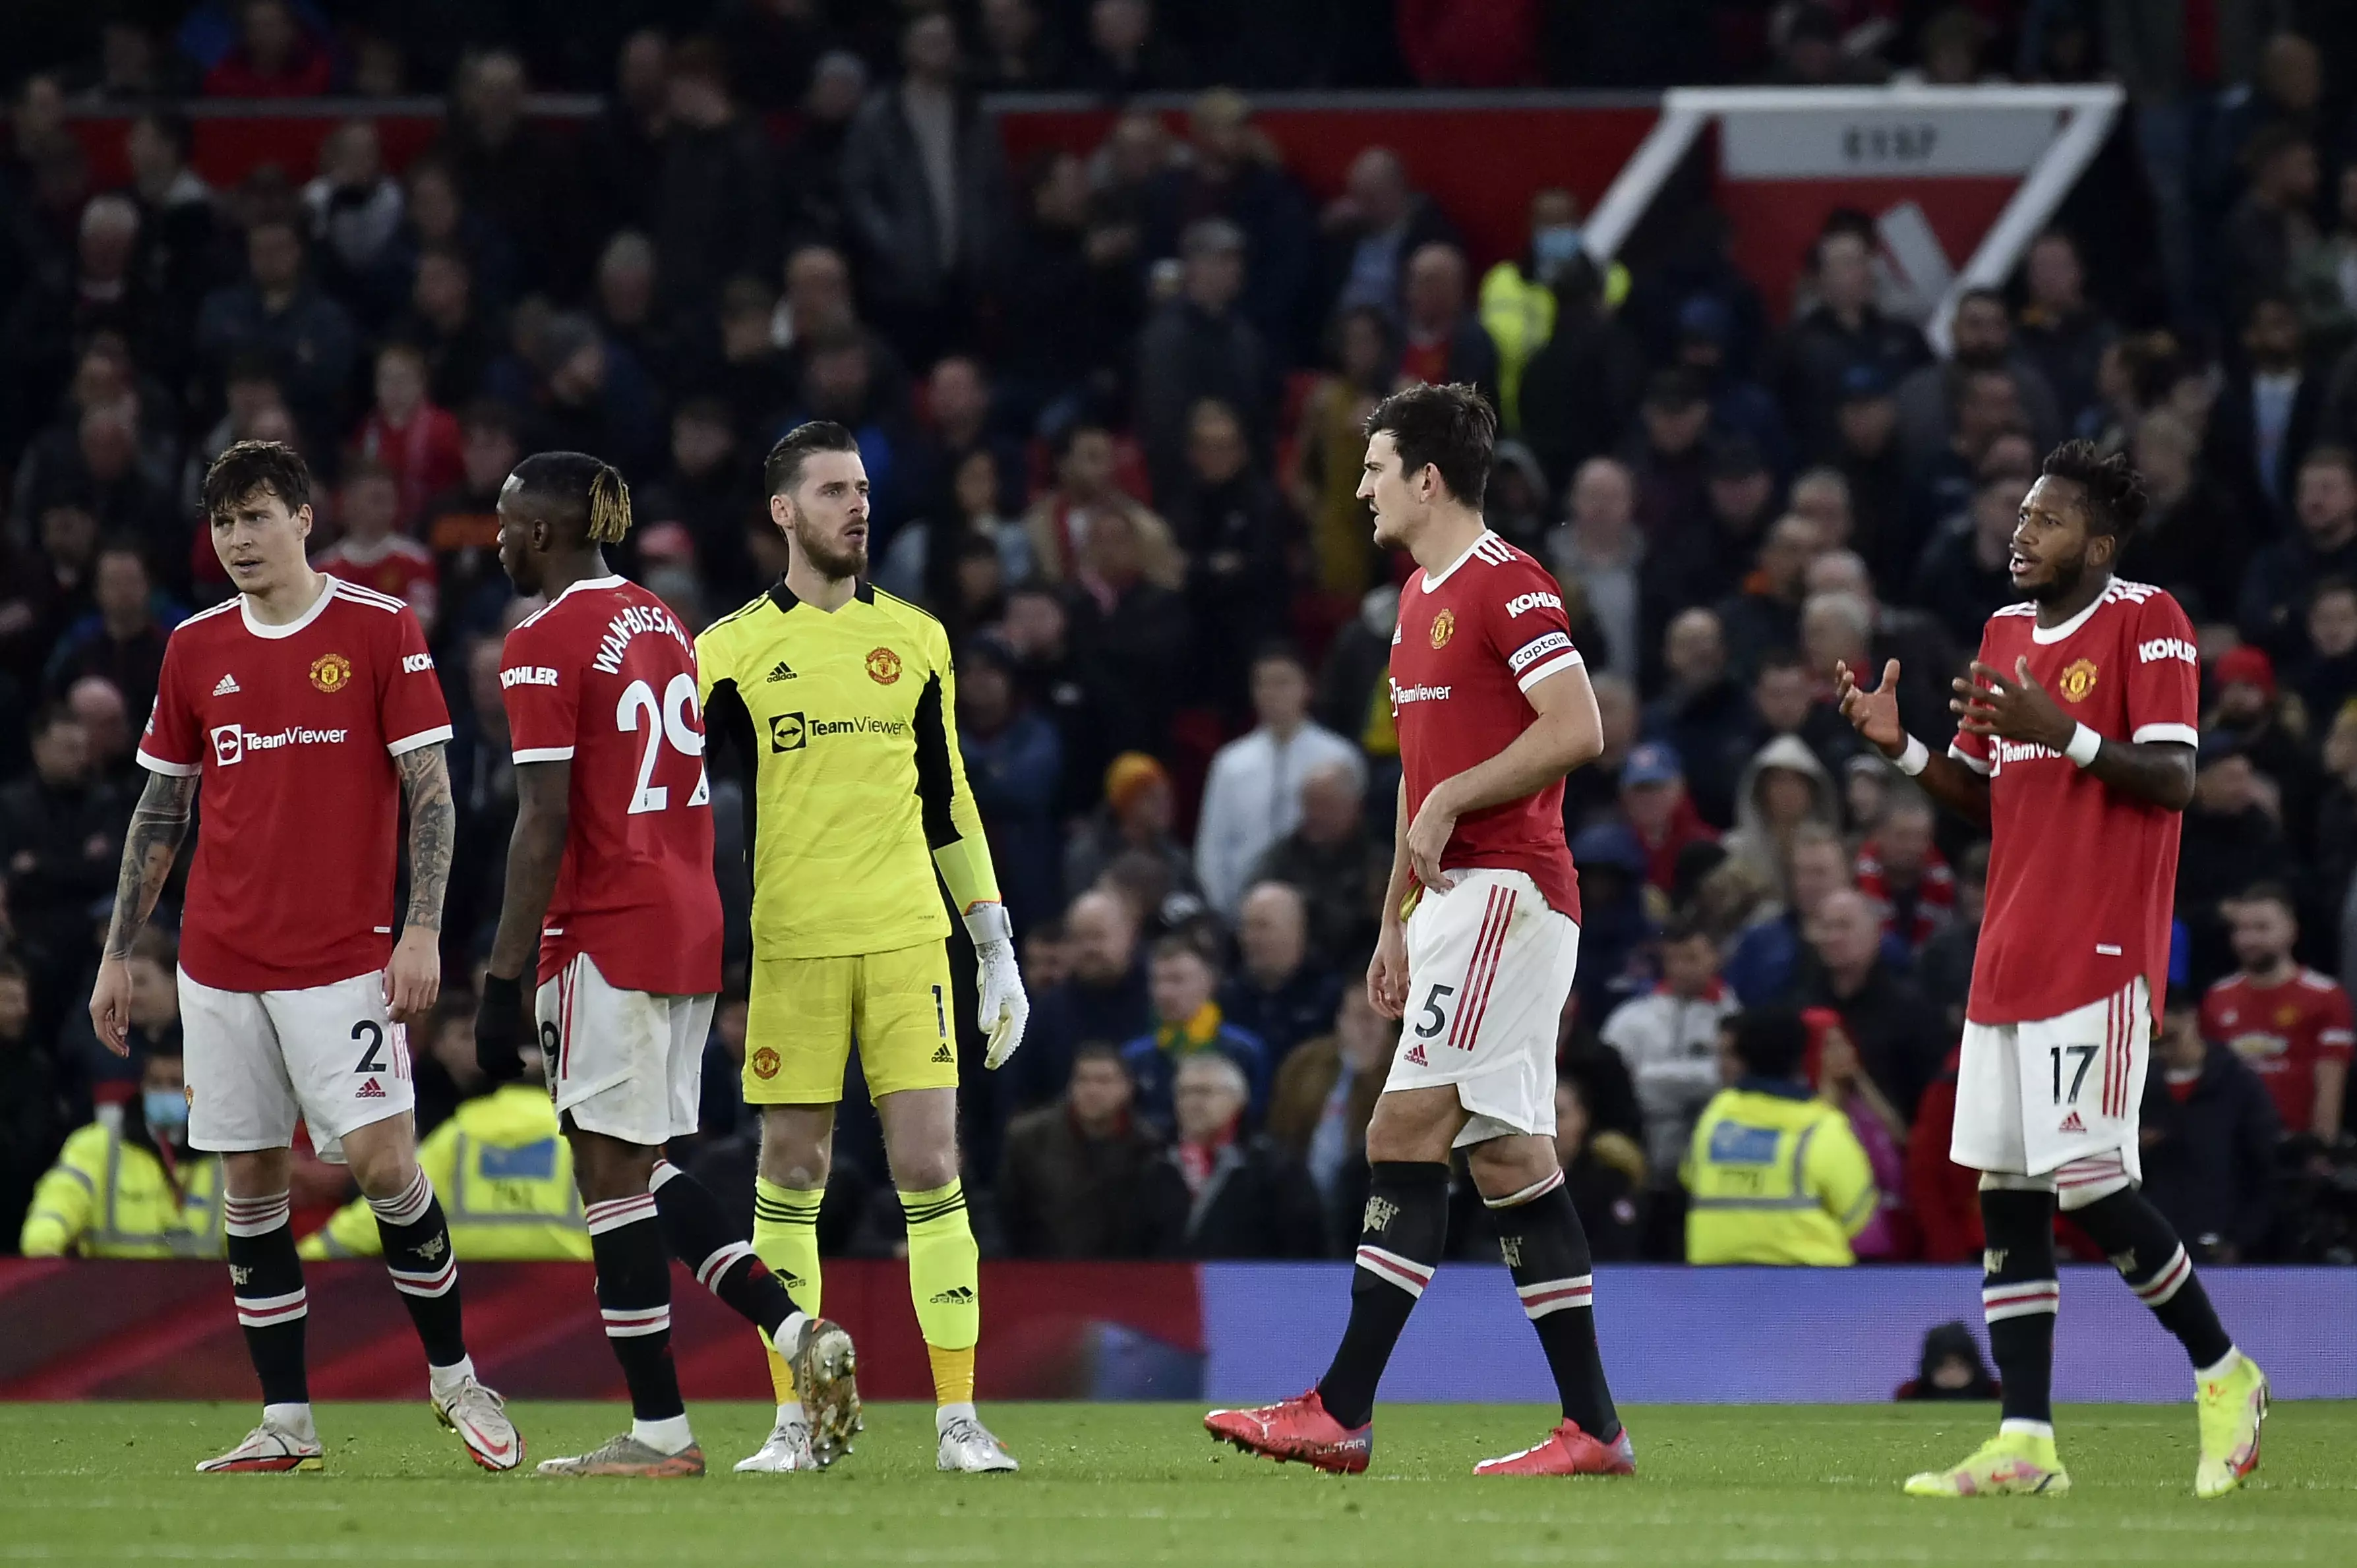 PA: Manchester United's players will be eager to bounce back after Sunday's heavy defeat